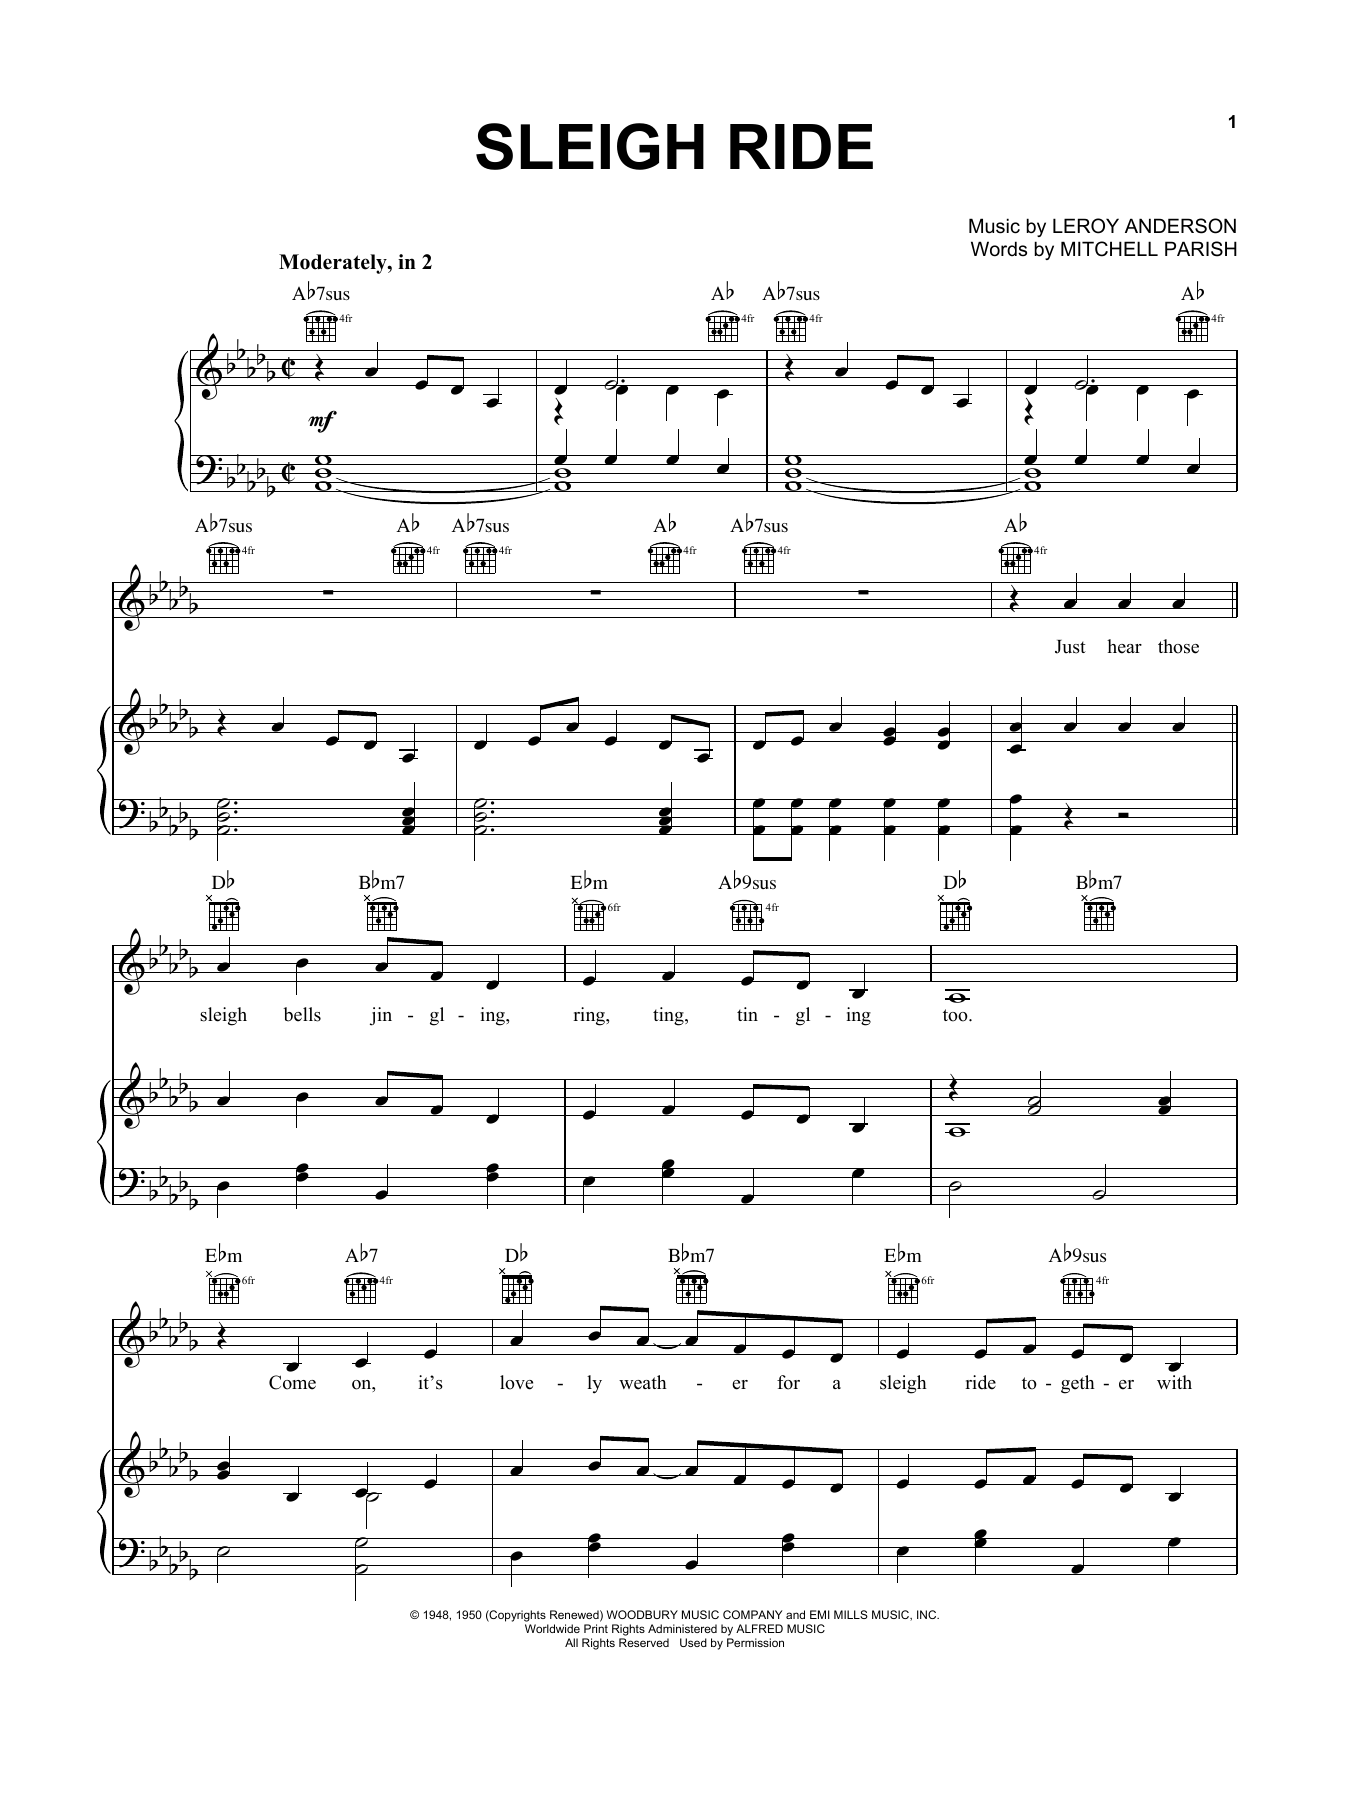 Download Leroy Anderson Sleigh Ride Sheet Music